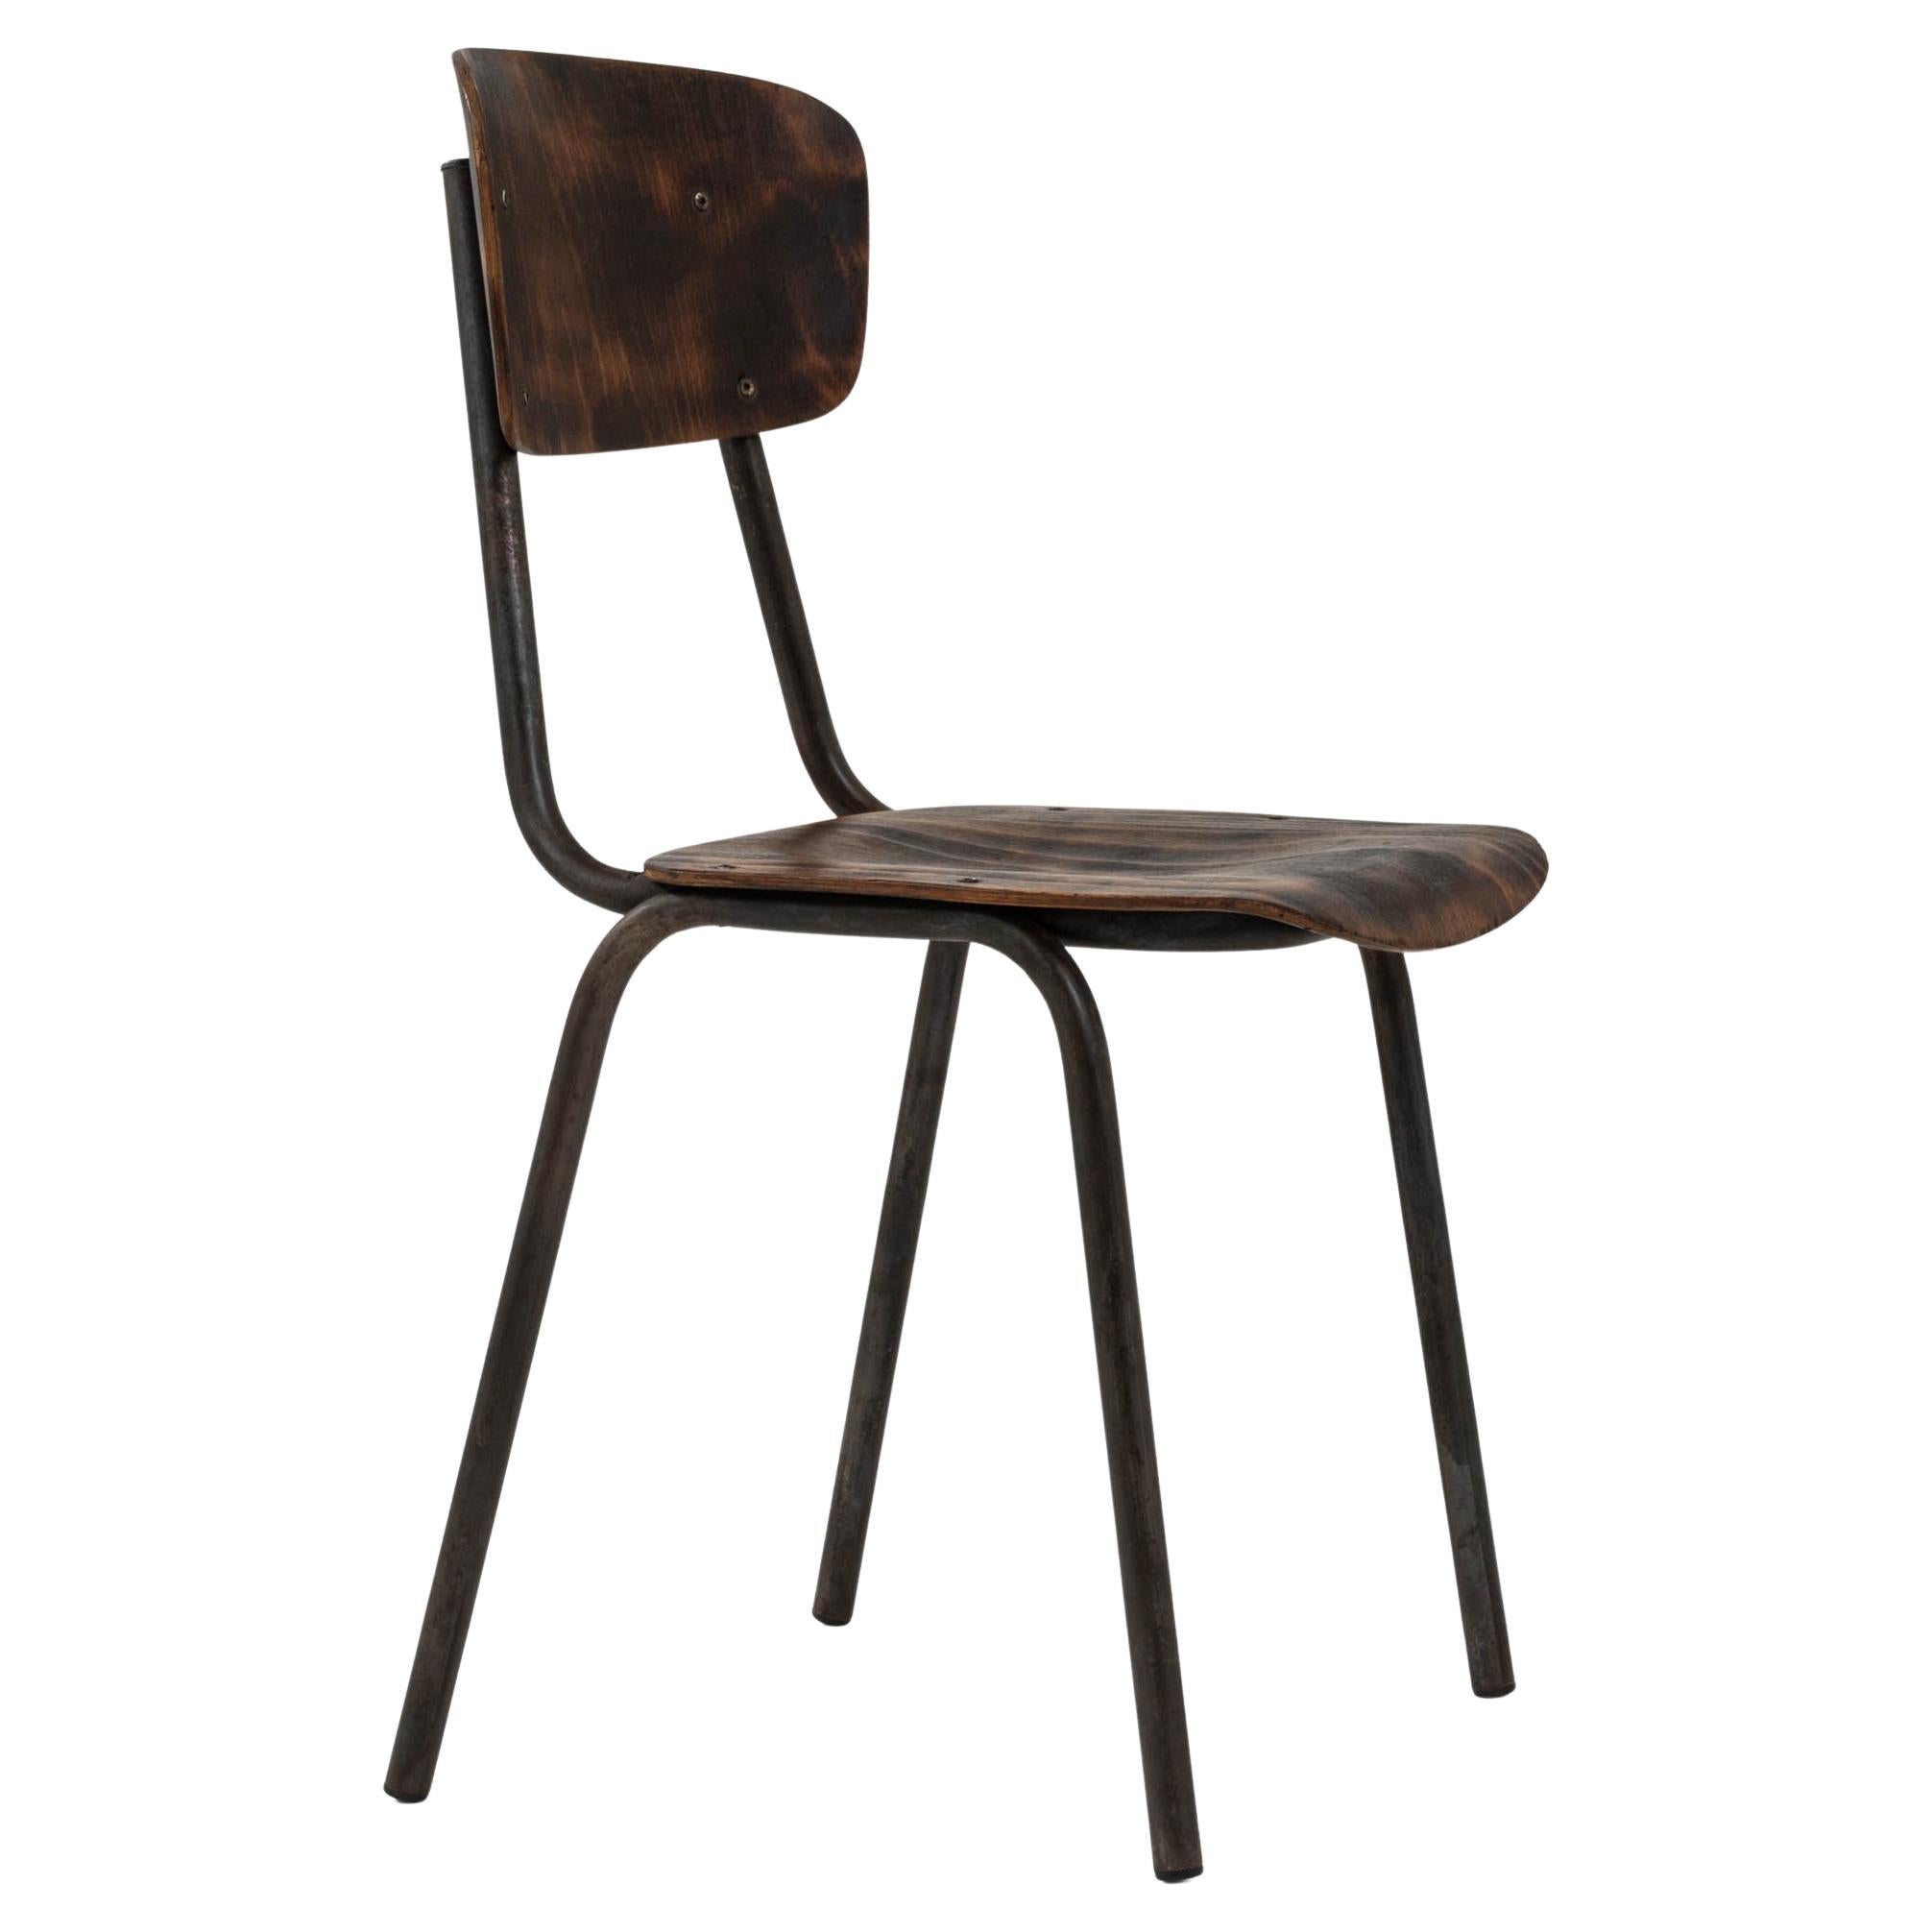 20th Century Central European Metal & Wooden Chair For Sale